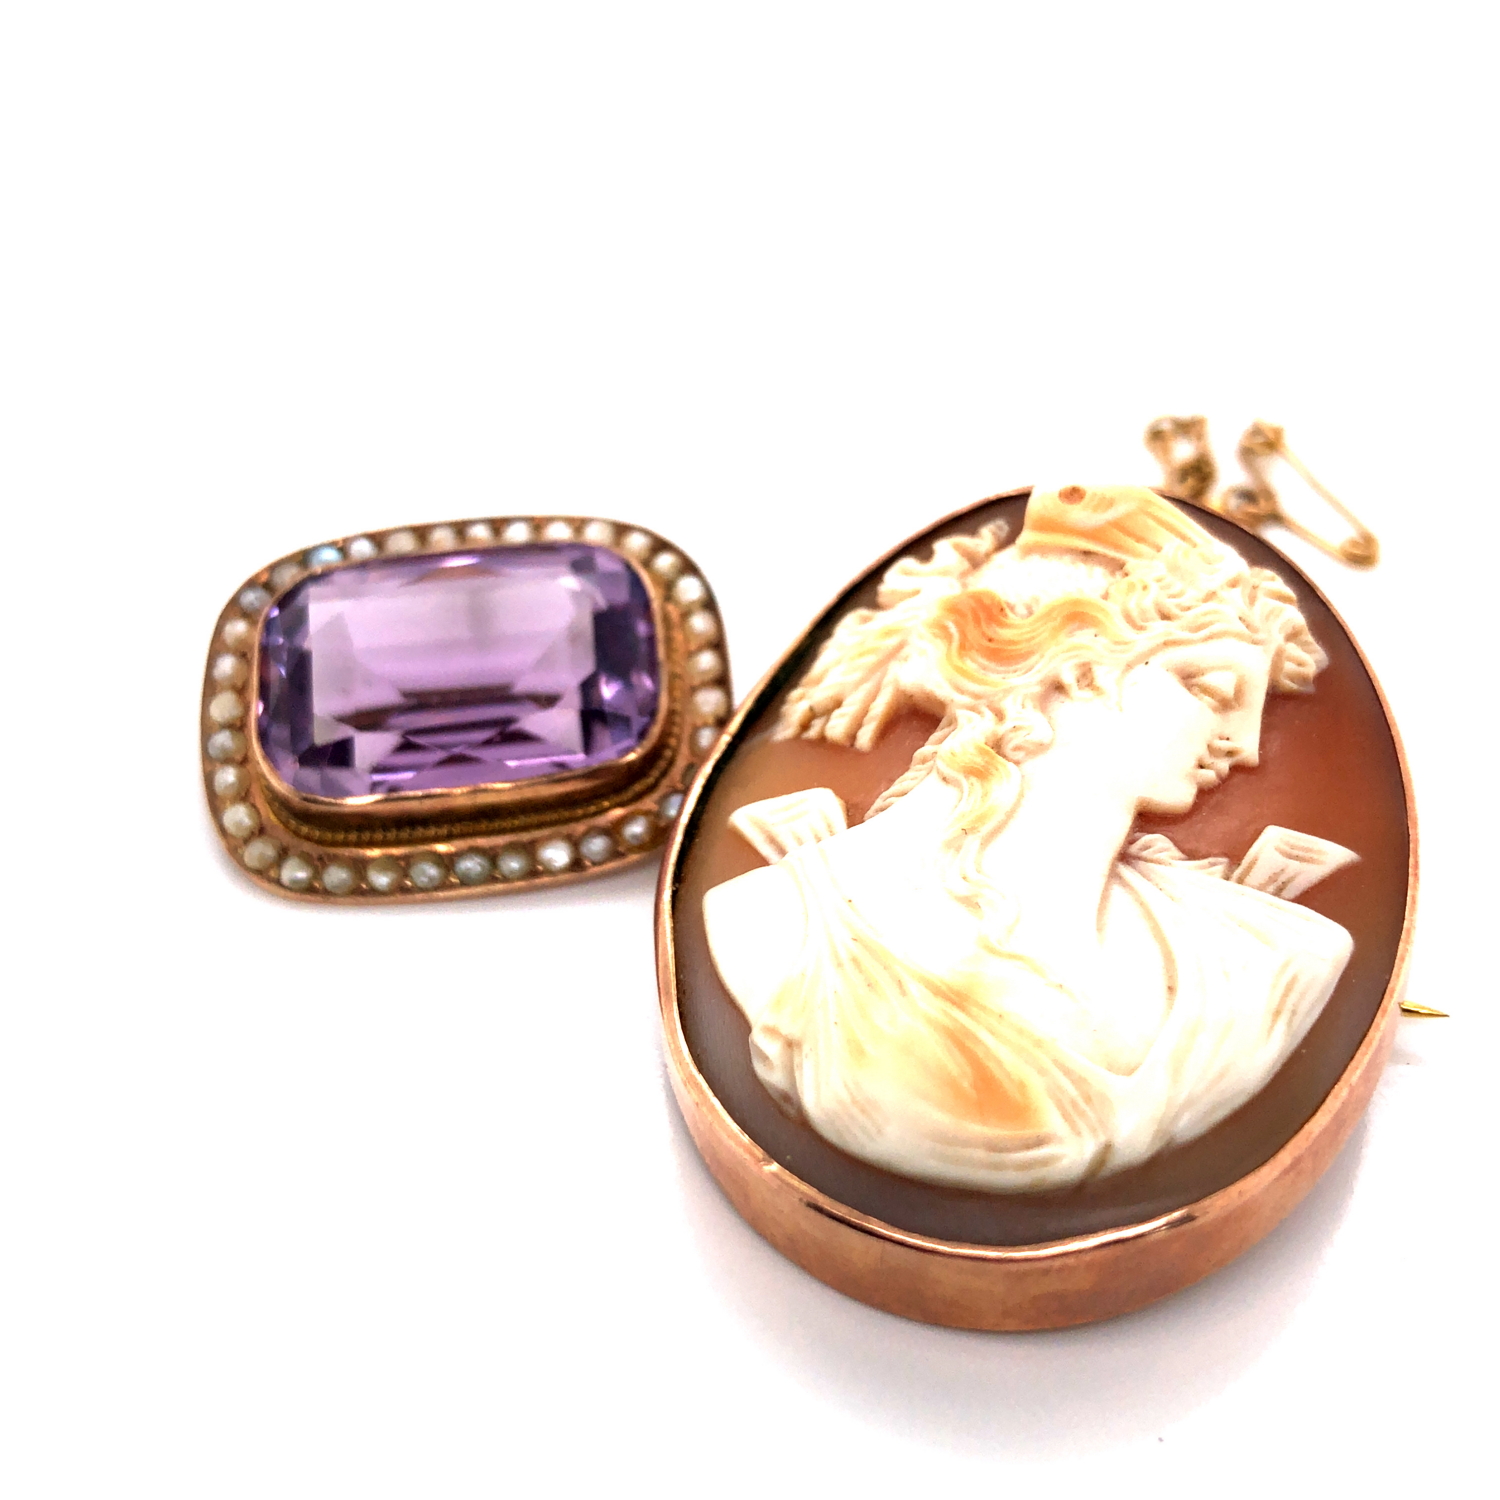 A VINTAGE 9ct HALLMARKED AMETHYST AND SEED PEARL BROOCH, TOGETHER WITH A EARLY 20th CENTURY PORTRAIT